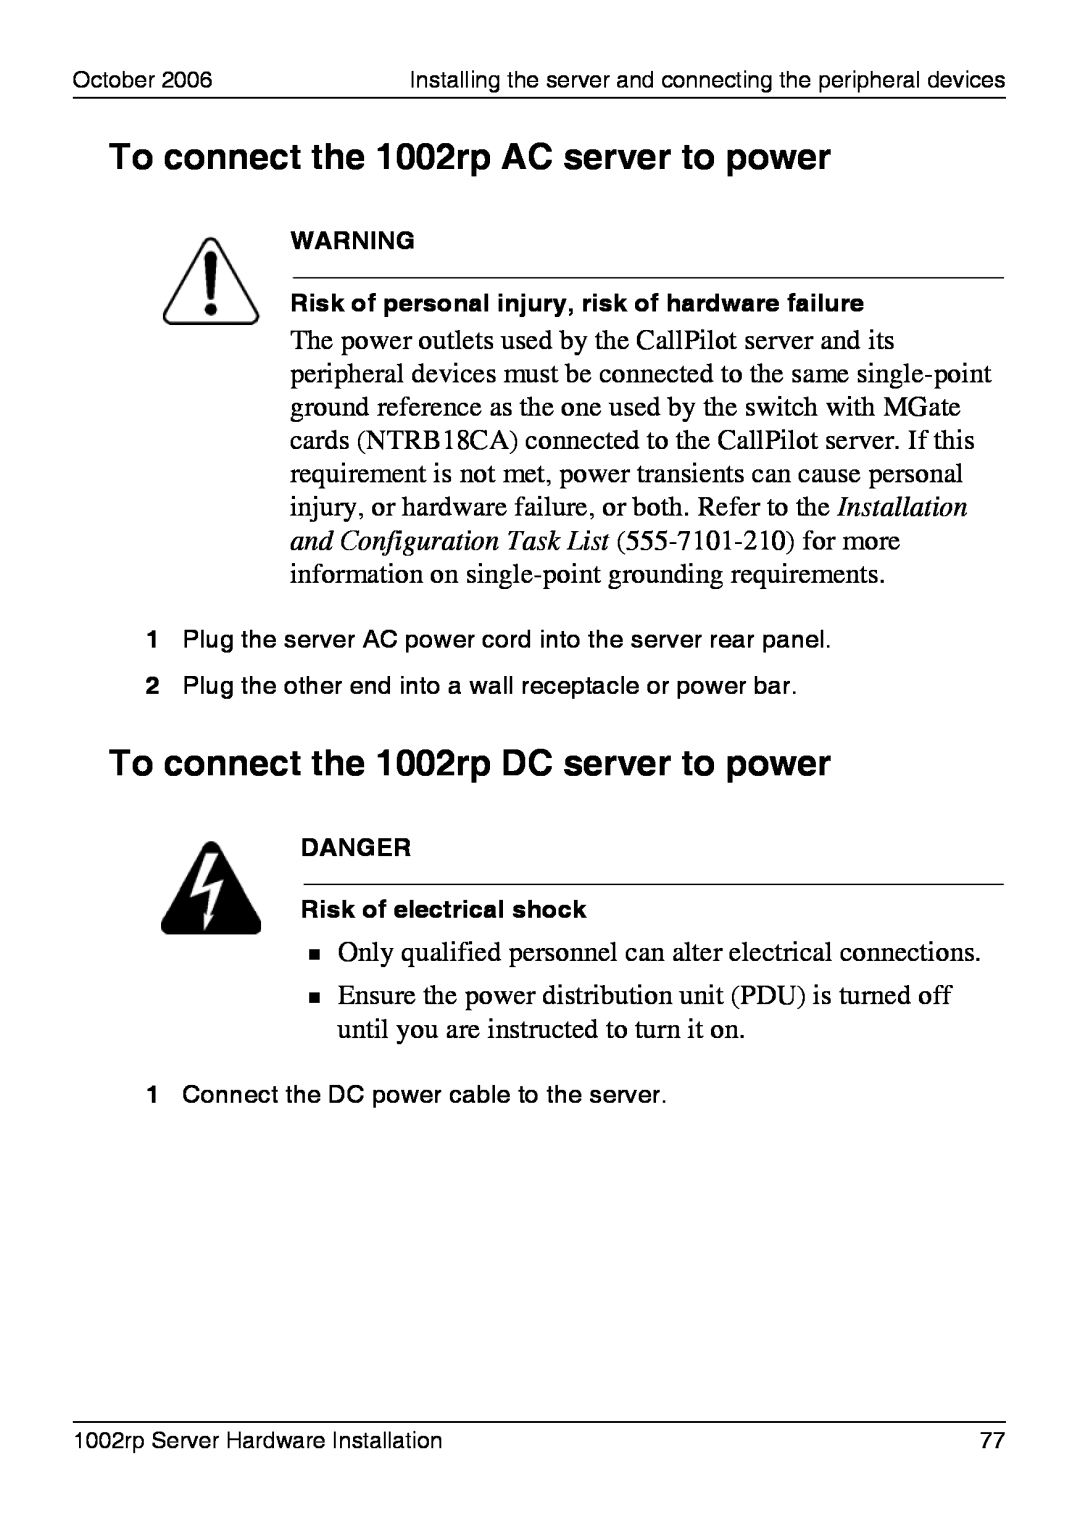 Nortel Networks manual To connect the 1002rp AC server to power, To connect the 1002rp DC server to power 